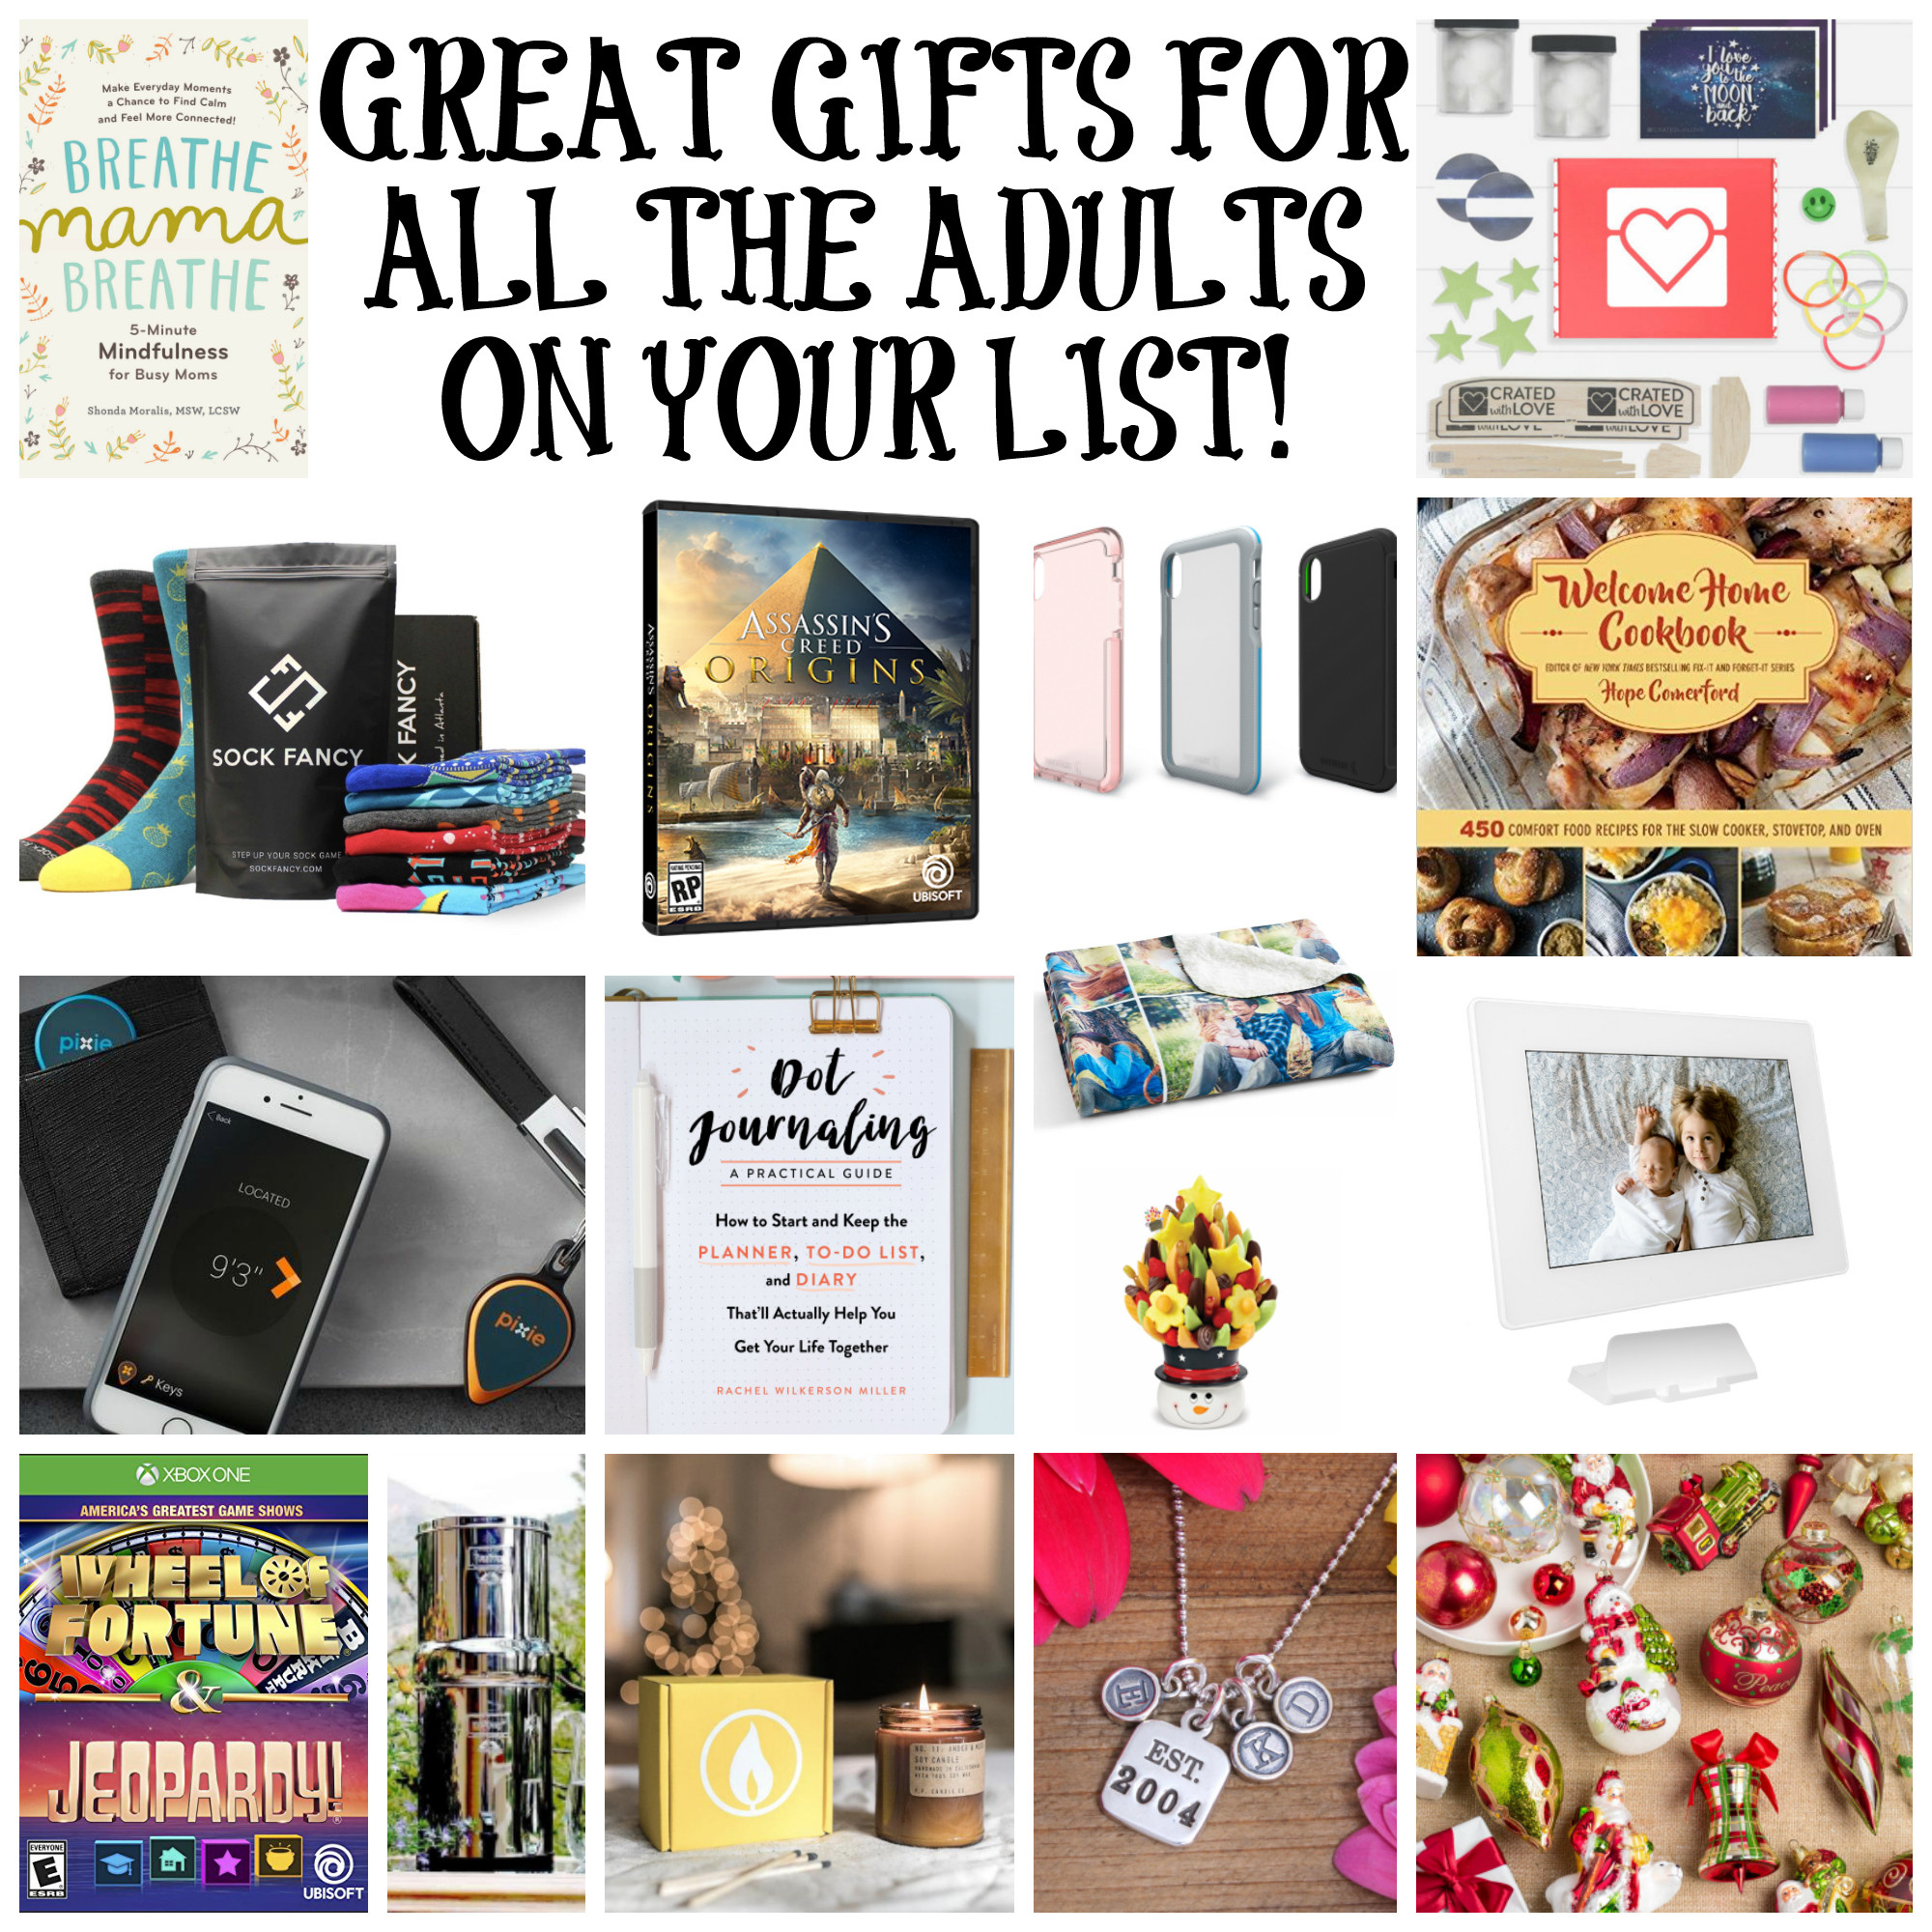 20 Of the Best Ideas for Adult Gift Ideas Home, Family, Style and Art